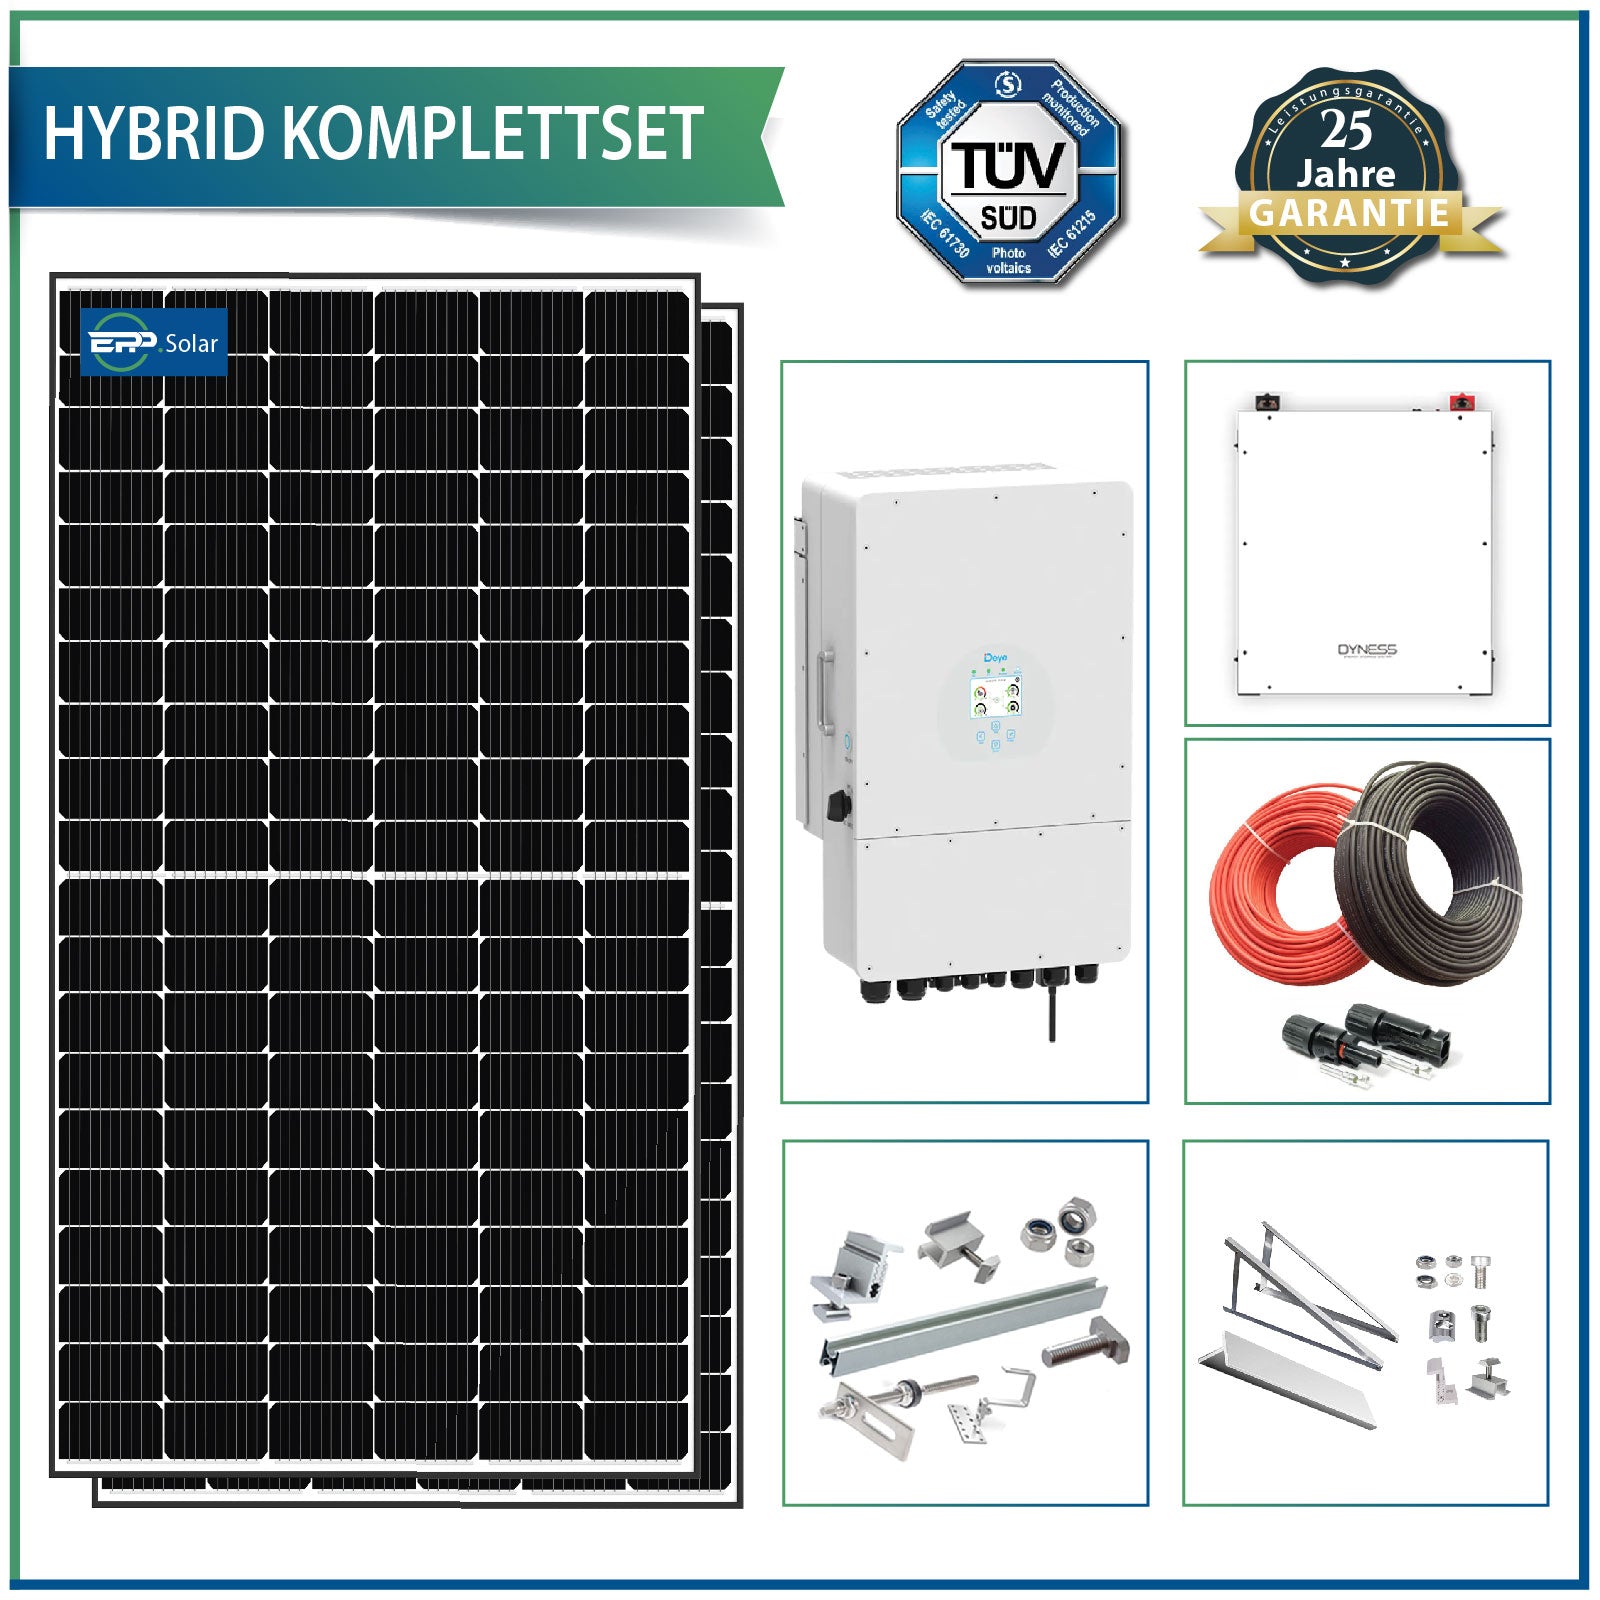 asdec life® photovoltaic complete package 1 with 10 KW PV modules - energy storage 5 KW - hybrid inverter 10 KW storage